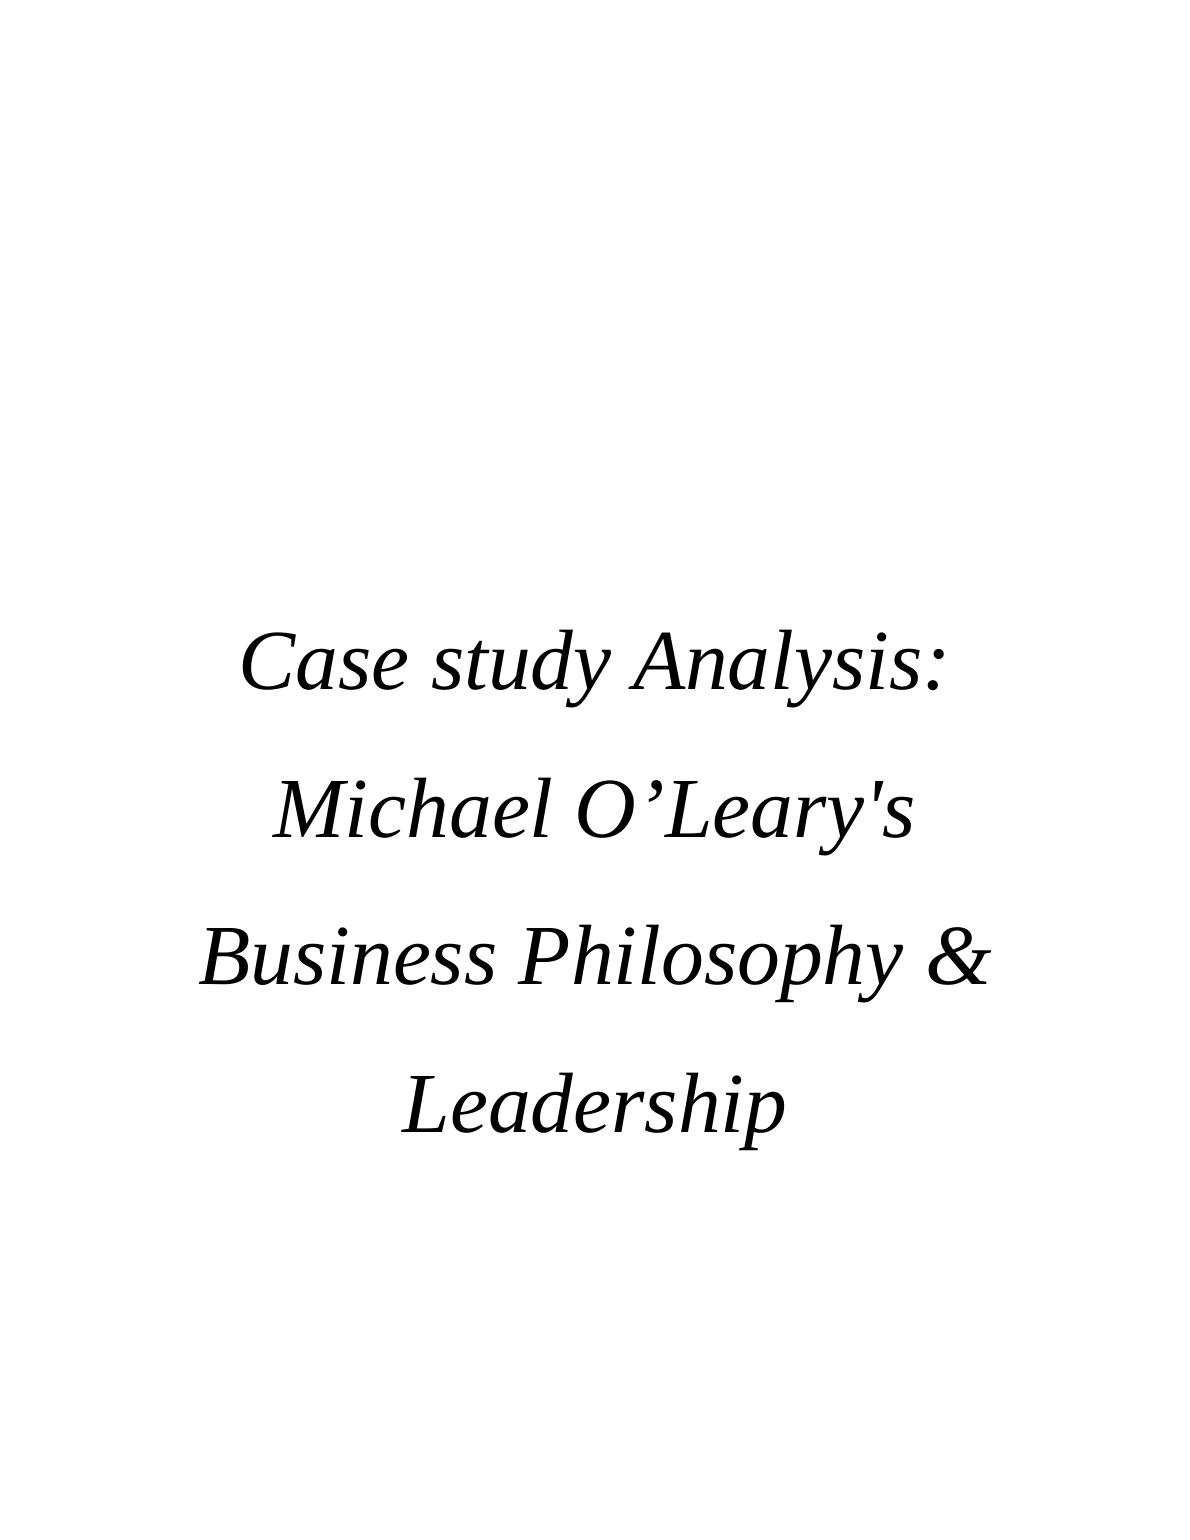 Michael O’Leary's Business Philosophy & Leadership_1